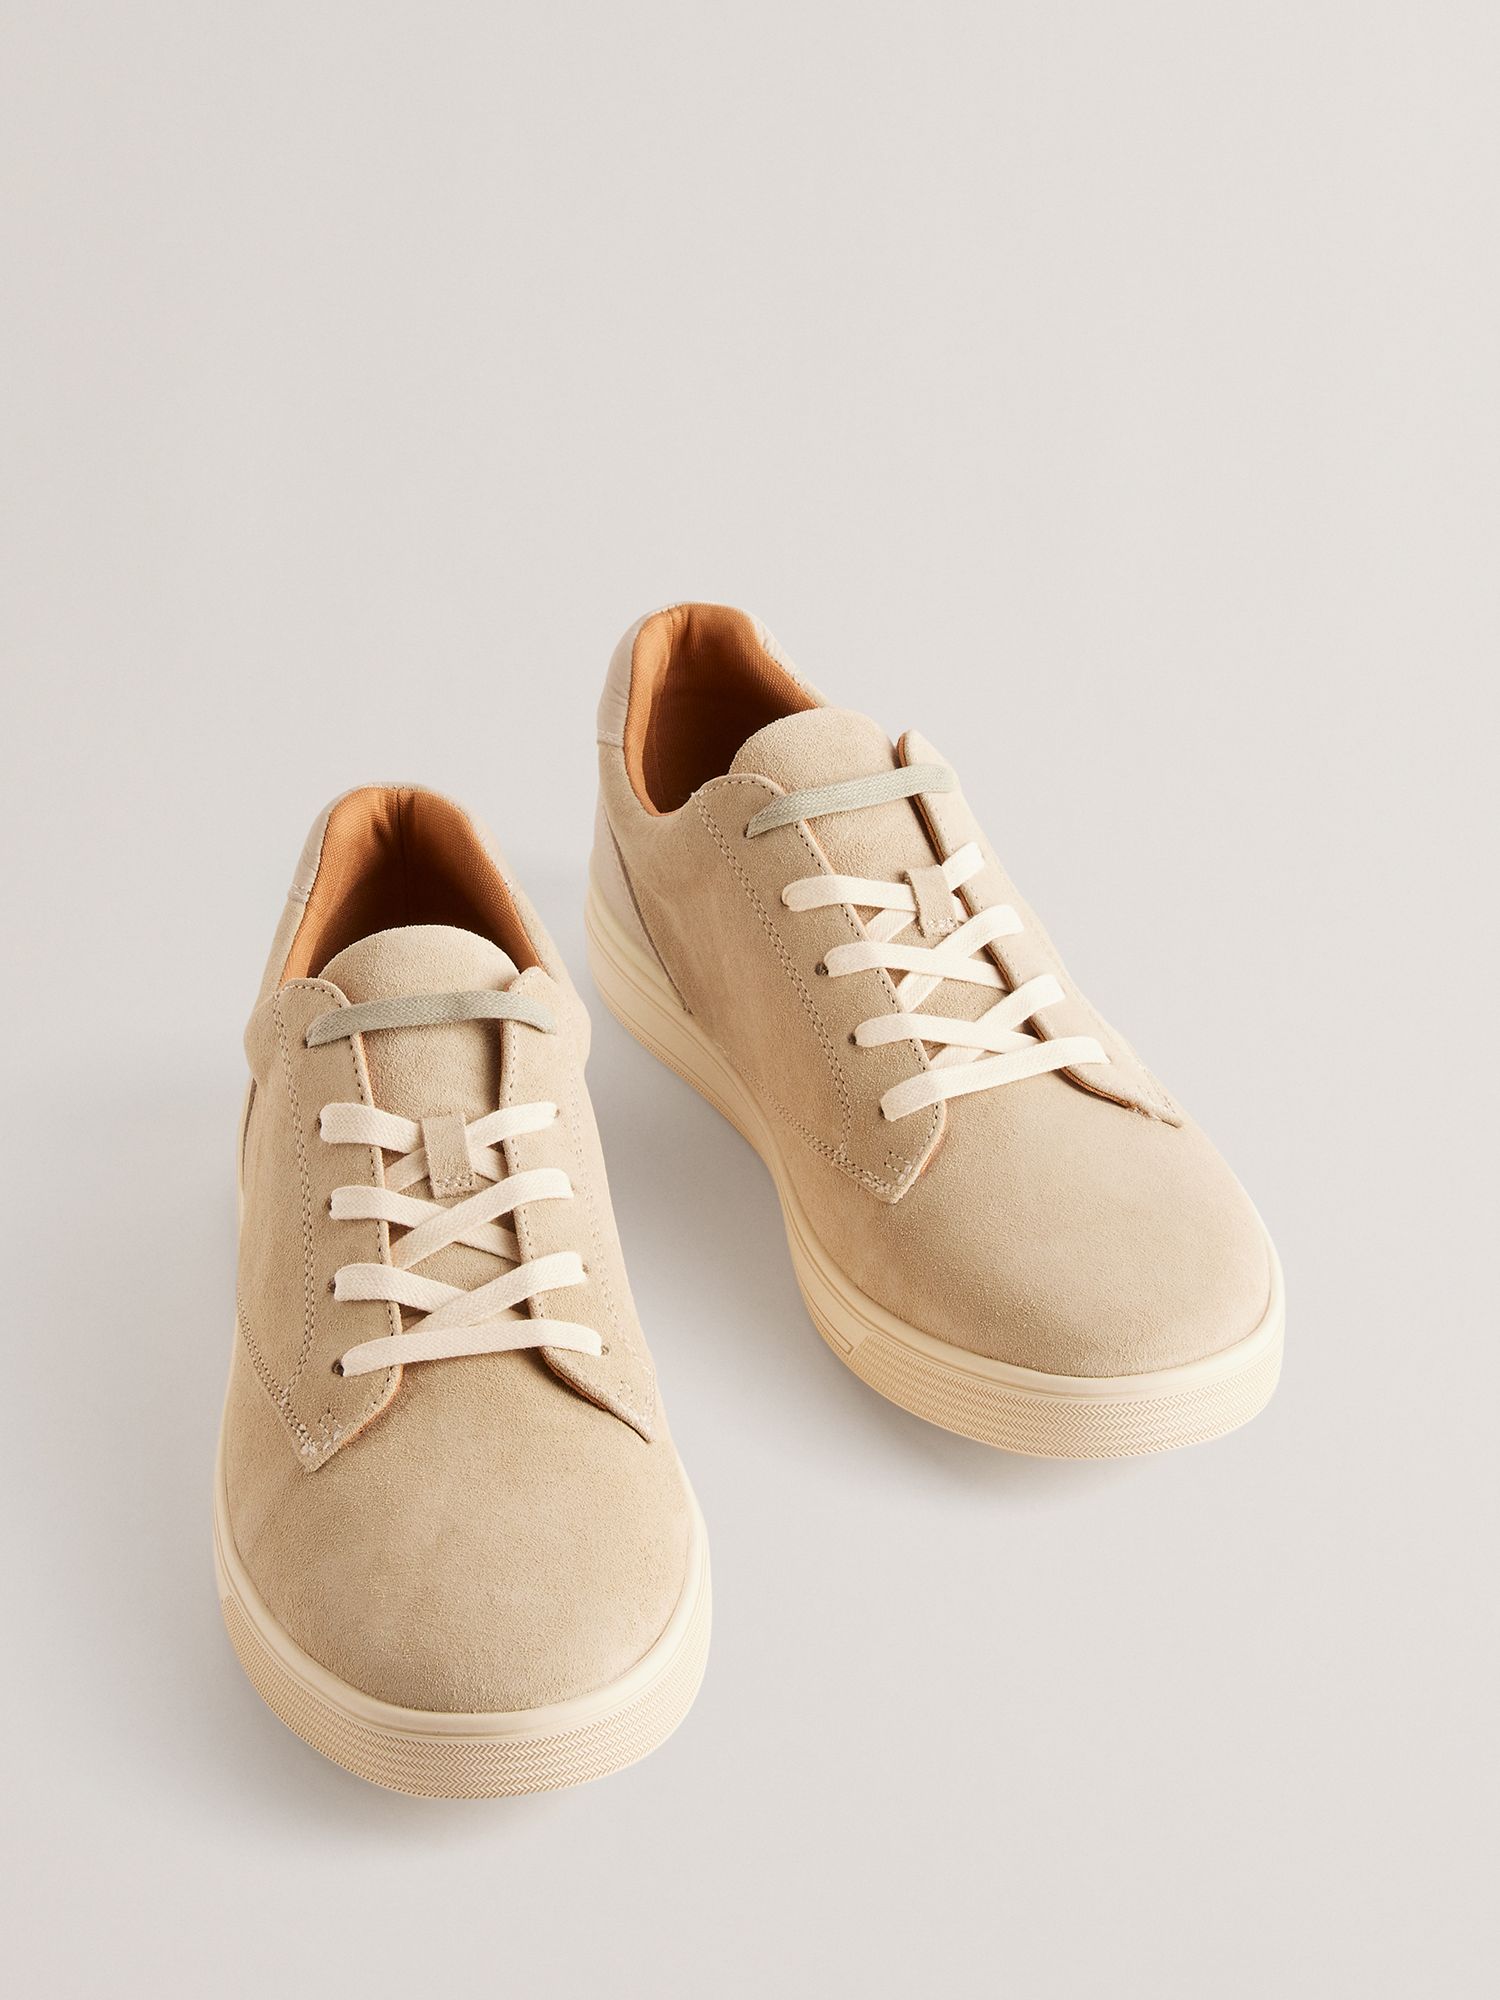 Buy Ted Baker Brentfd Textured Leather Low Top Trainers Online at johnlewis.com